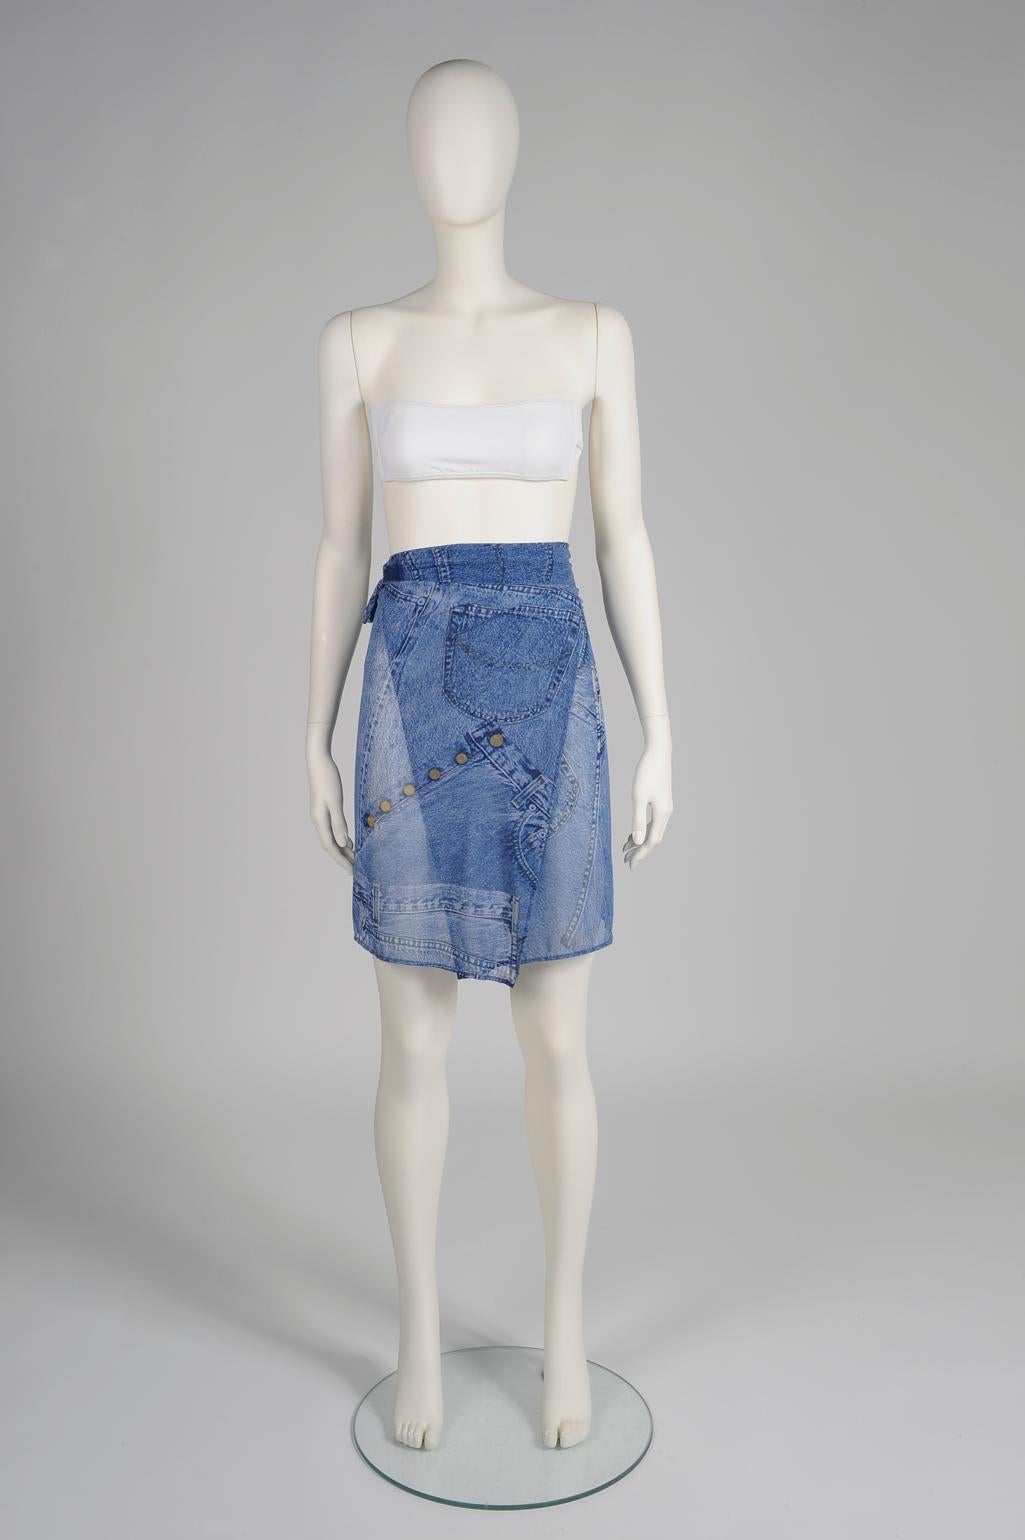 From the unmissable early 2000 John Galliano for Christian Dior collection, this sheer pareo/sarong features the iconic “trompe l’oeil” denim print of that season. Made from super light polyamide (76%) and elasthan (24%), it is finished with two